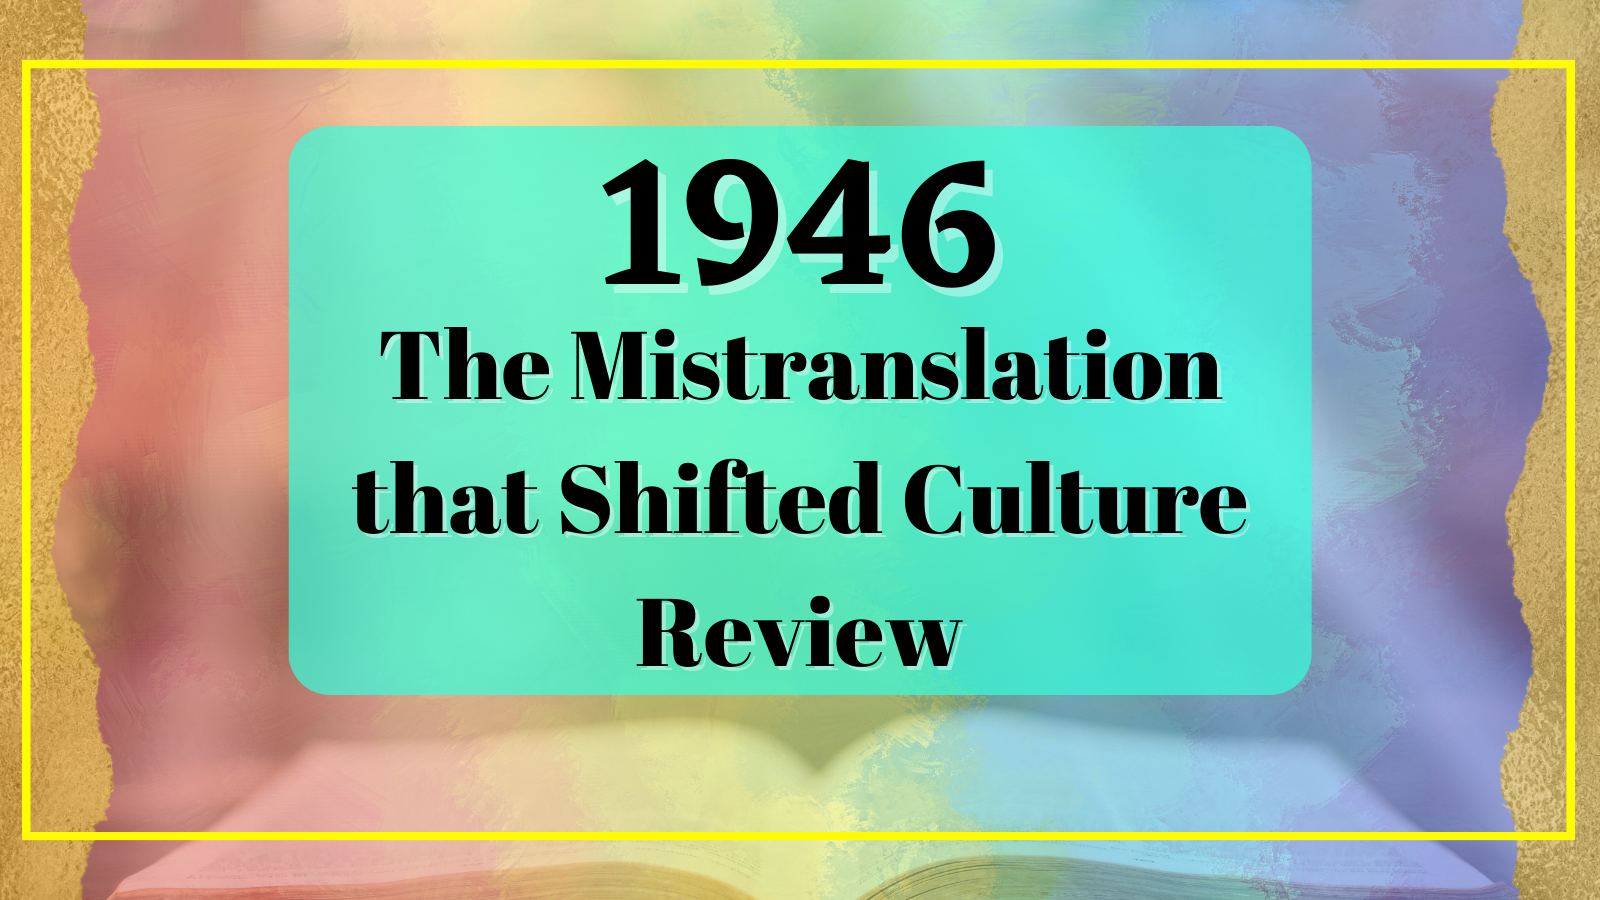 5 Lessons from the 1946 Documentary The Mistranslation that Shifted